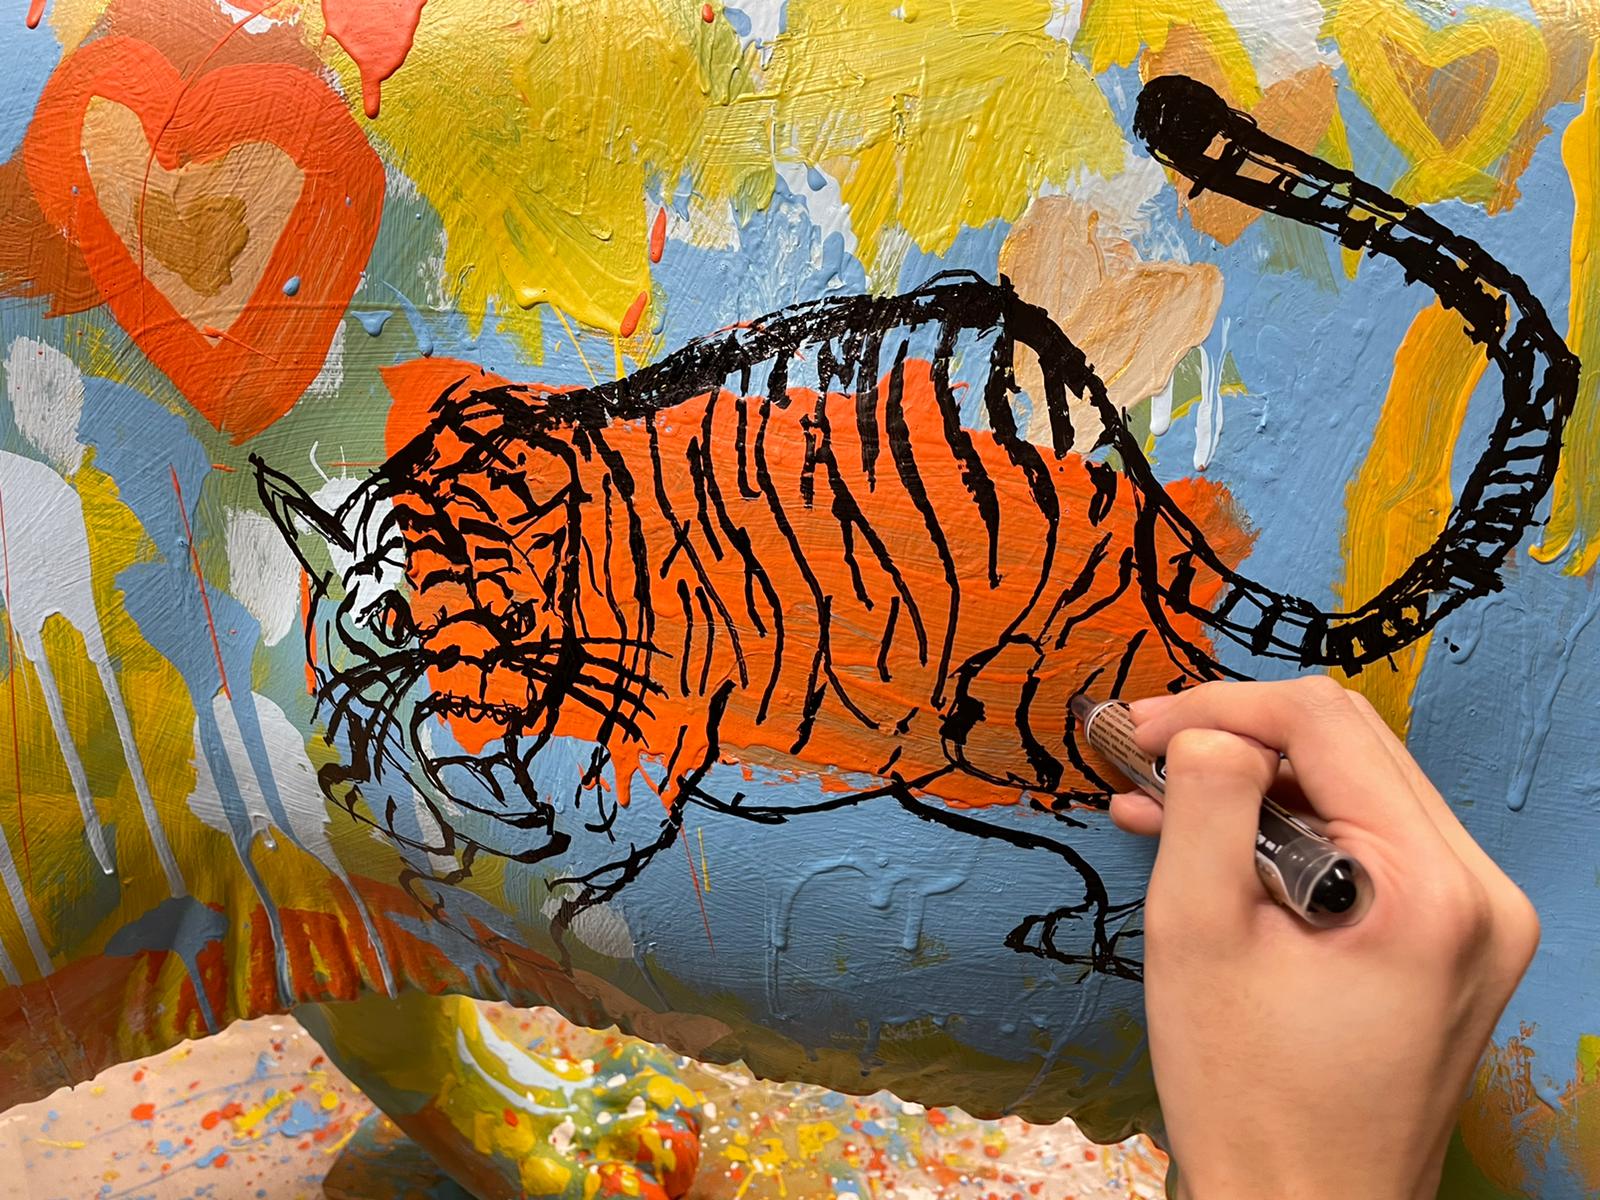 The Animal Project artist sketching a tiger on the sculpture